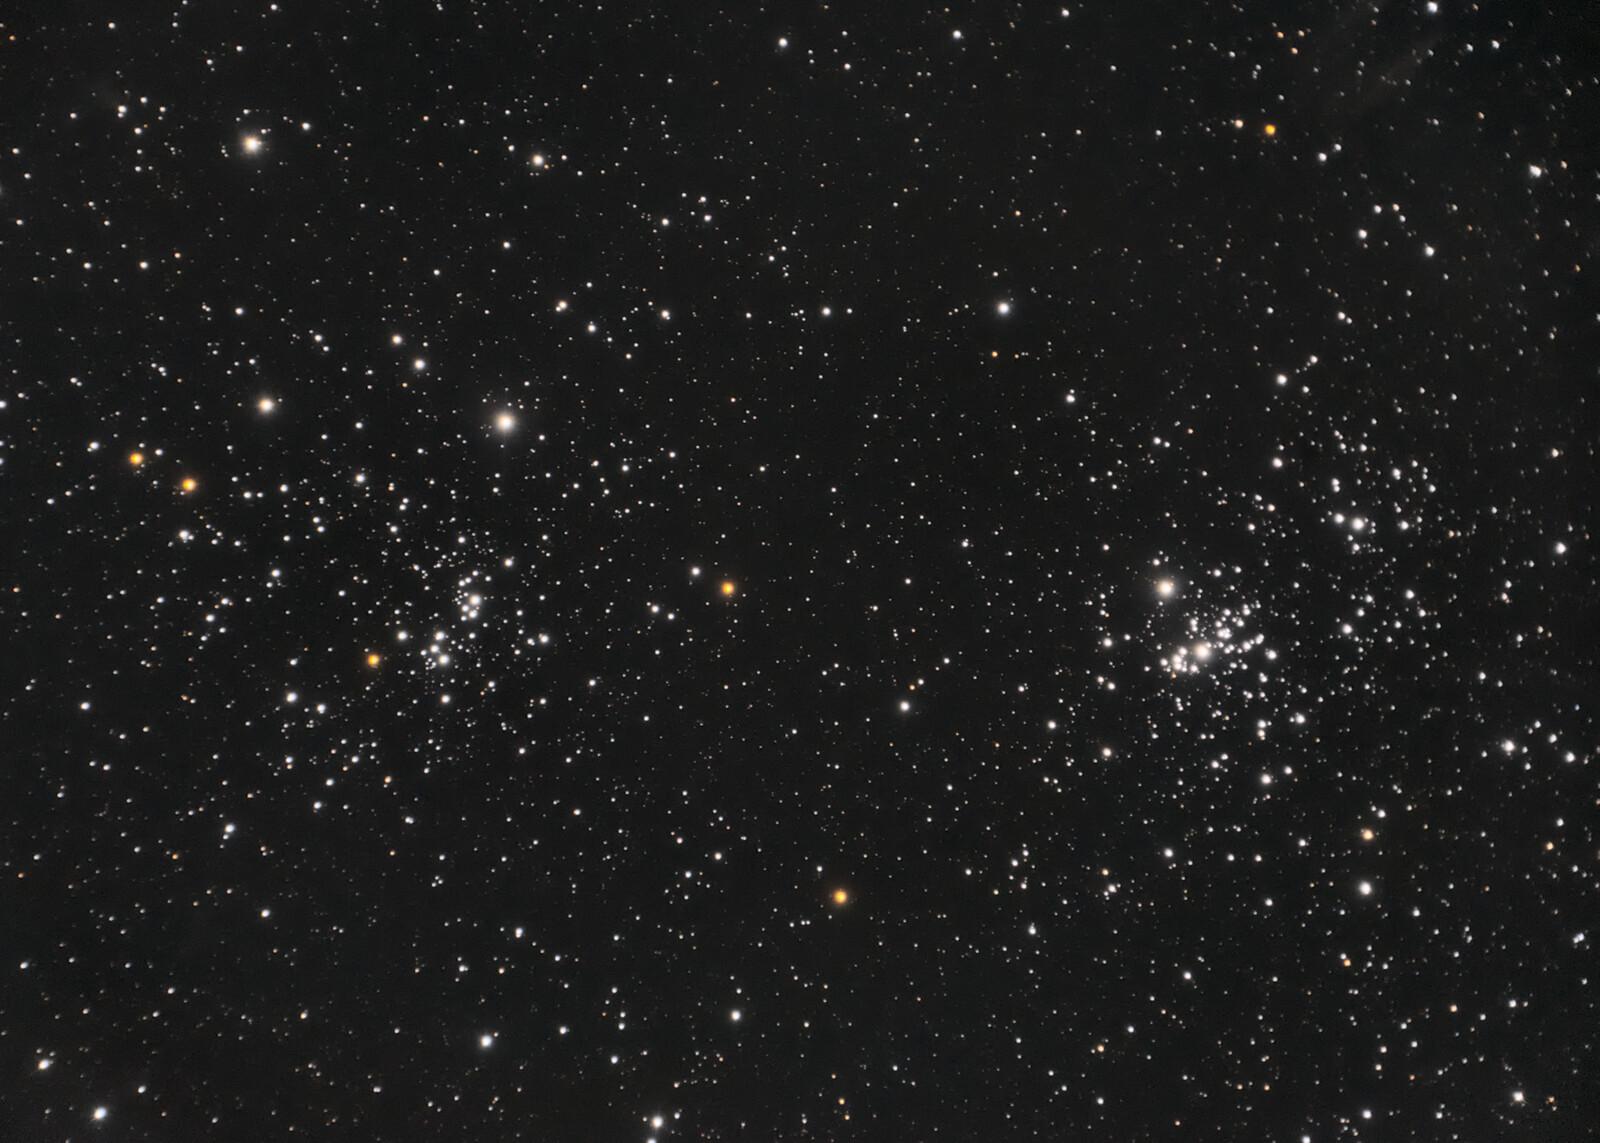 NGC 869 & 884 (Double Cluster)